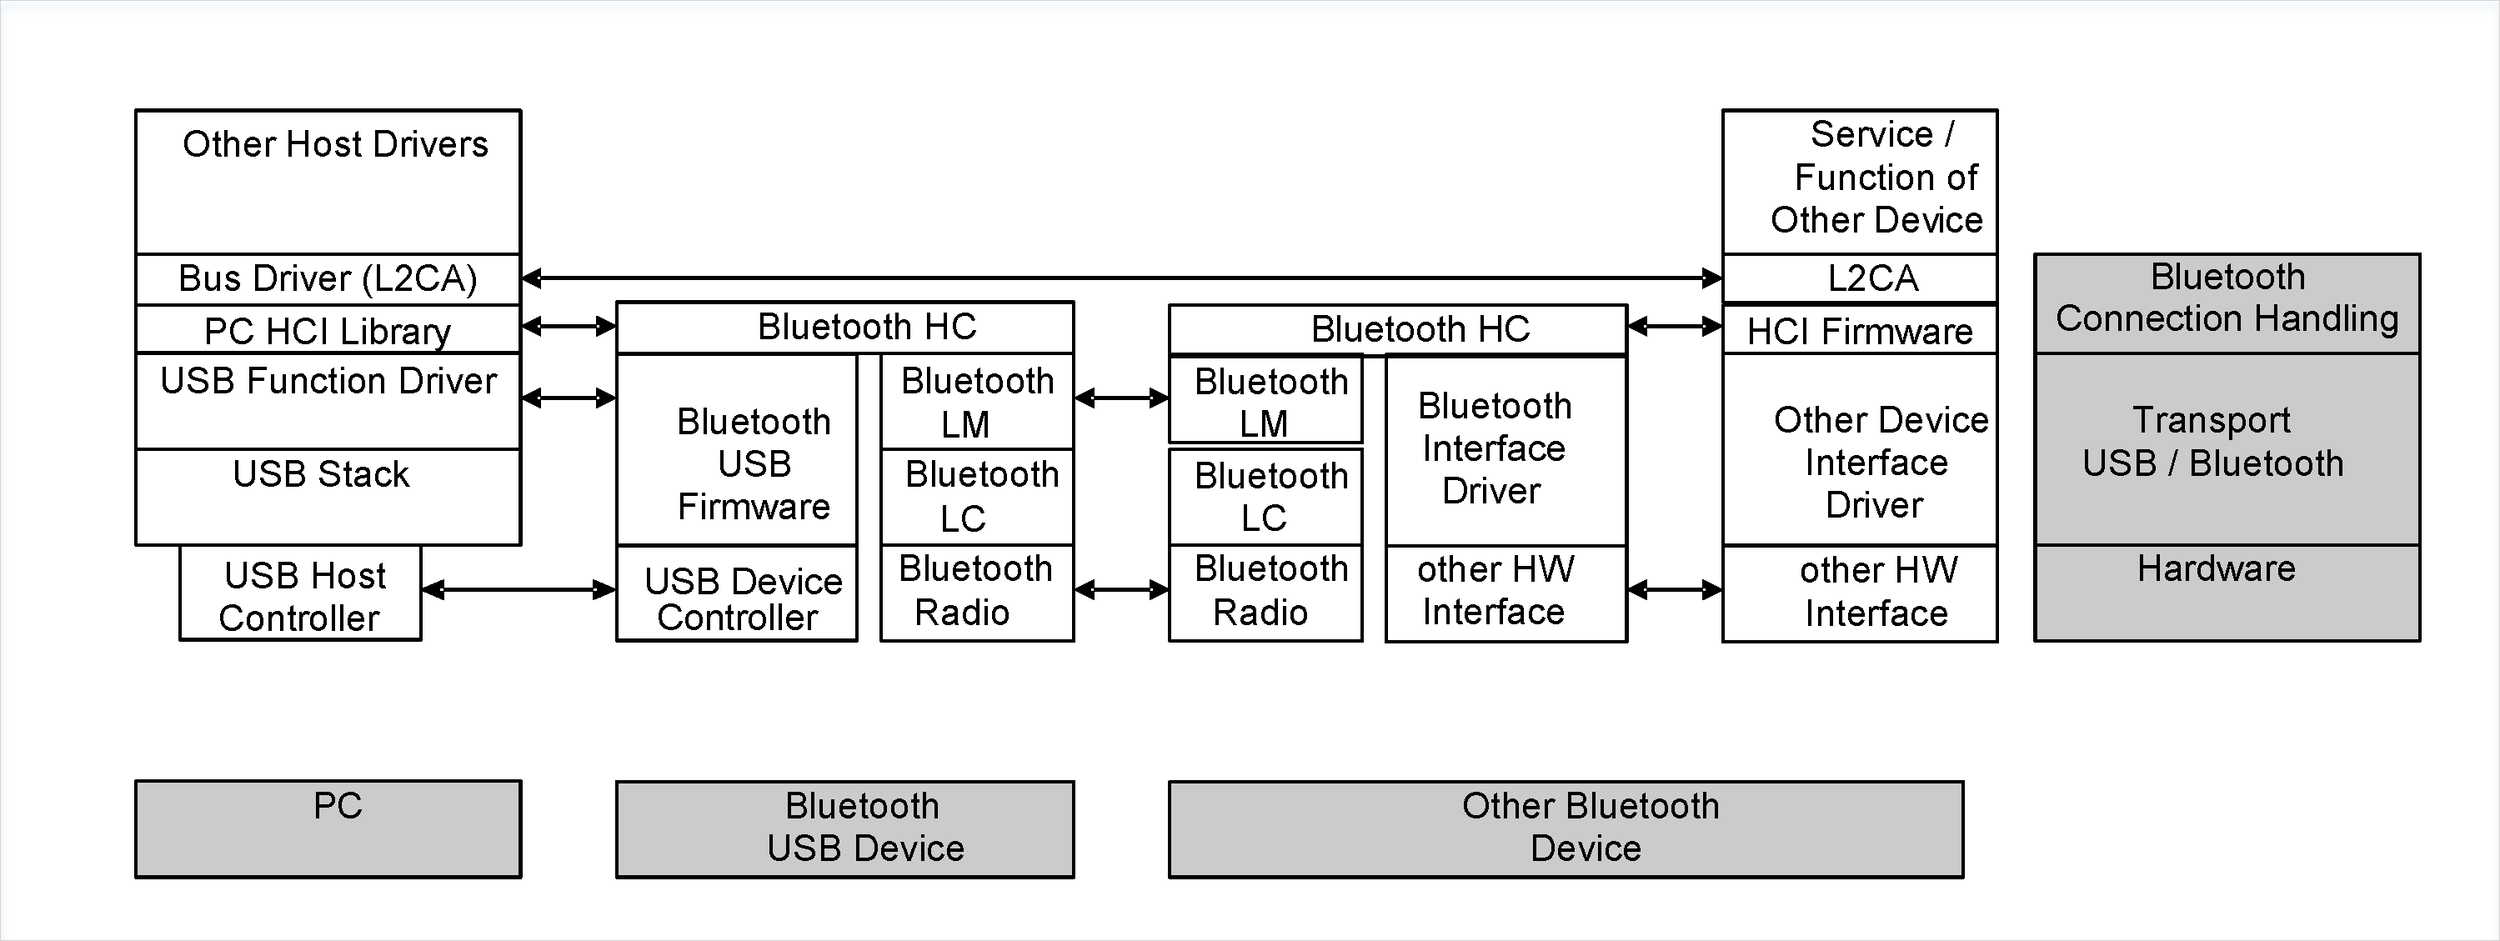 Flow of data from one Bluetooth device to another